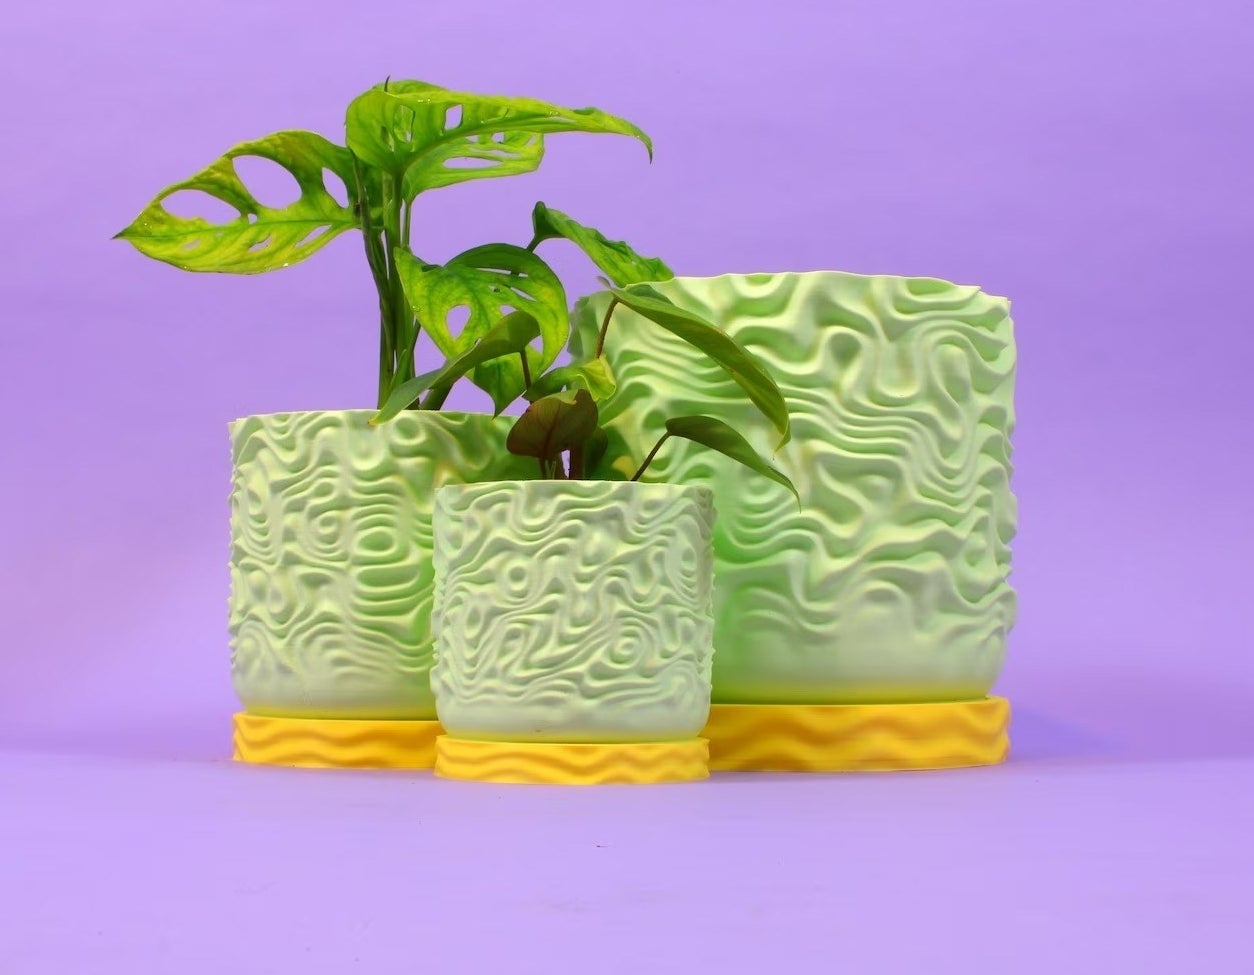 Three light green planters with groovy designs are shown